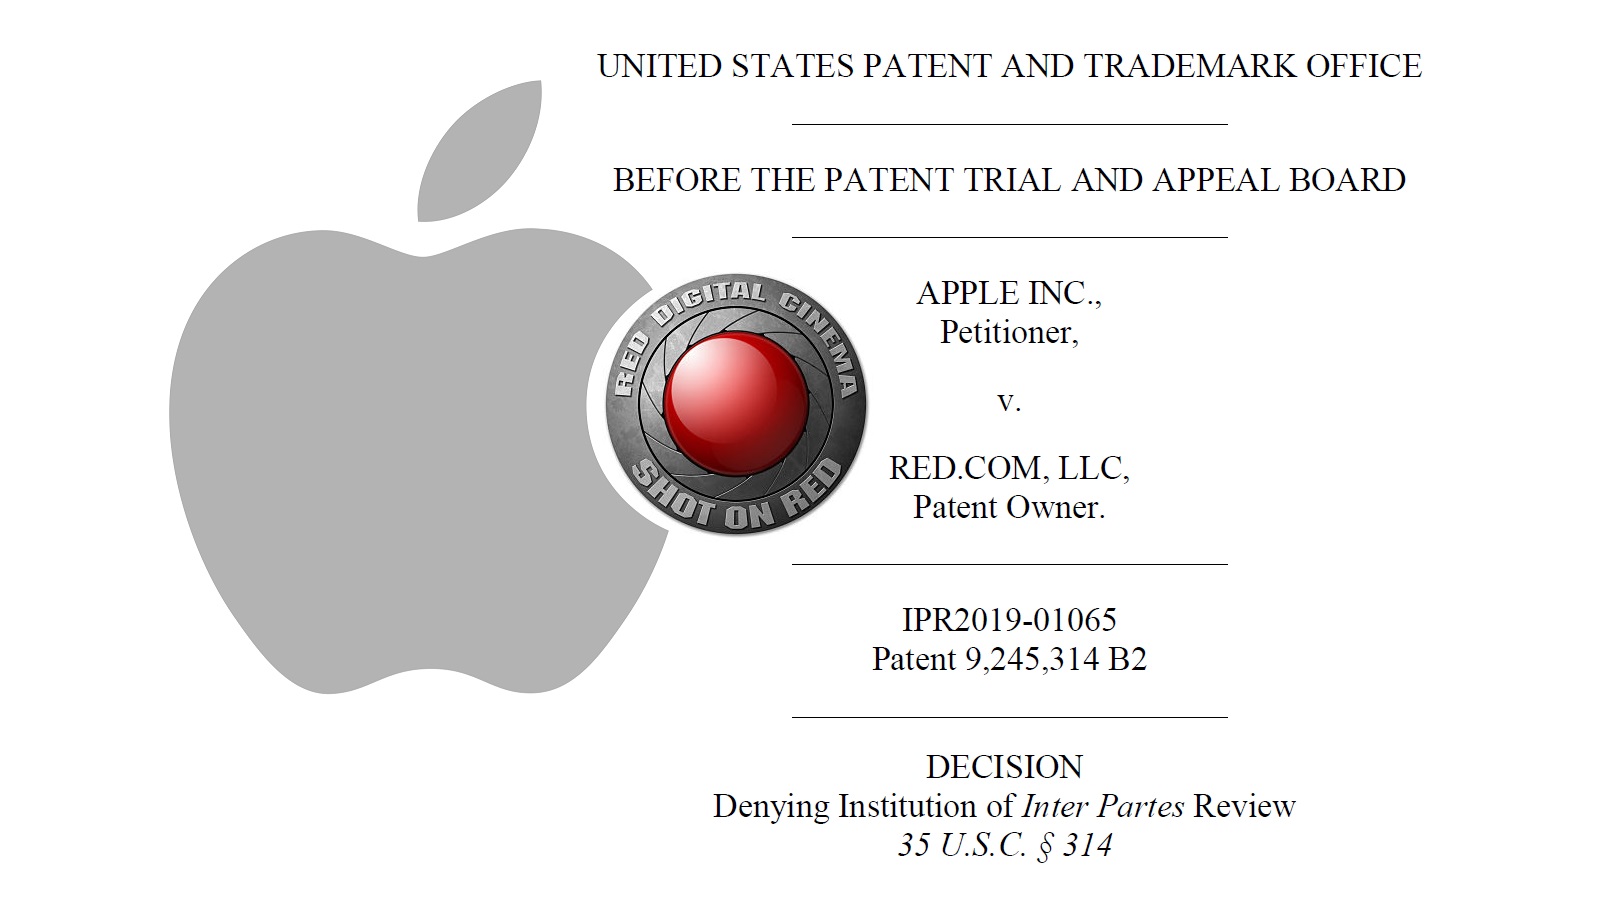 Apple has Won a Patent for their Redeemable Card Packaging and